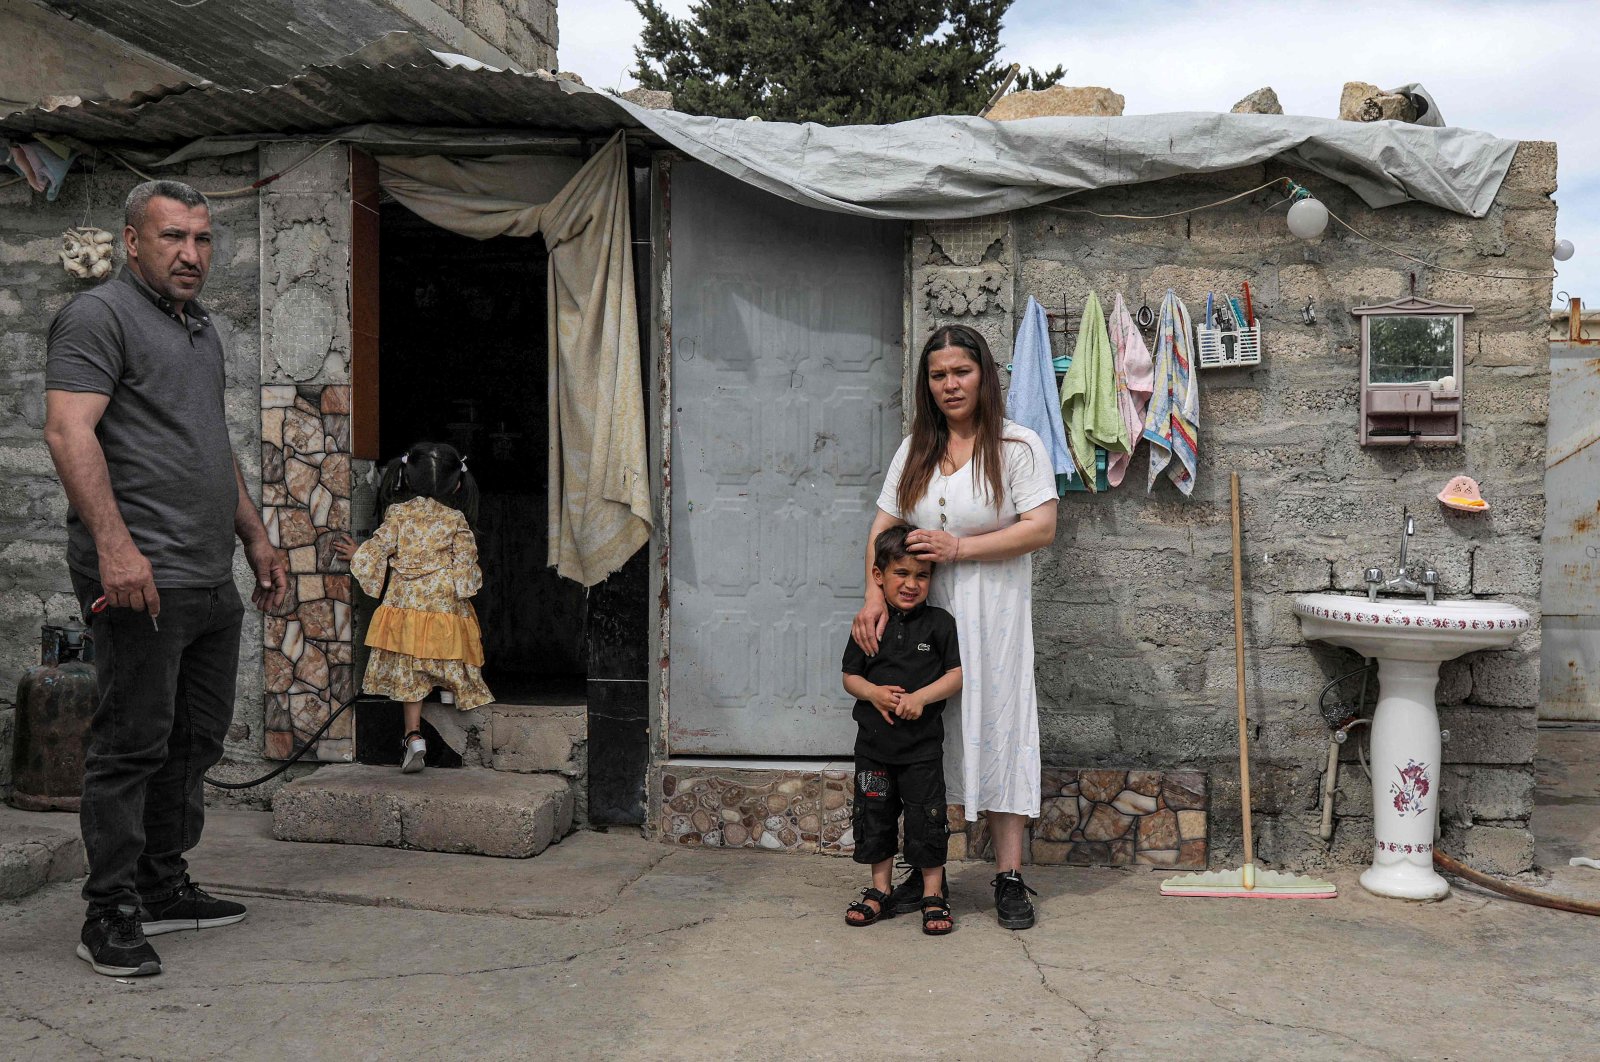 Hayam (R), a 26-year-old displaced Iraqi woman from the Yazidi community, poses for a picture outside a home during an interview with her husband Marwan and children in the region of Sharya, some 15 kilometers near the northern Iraqi city of Dohuk, April 19, 2023. (AFP Photo)